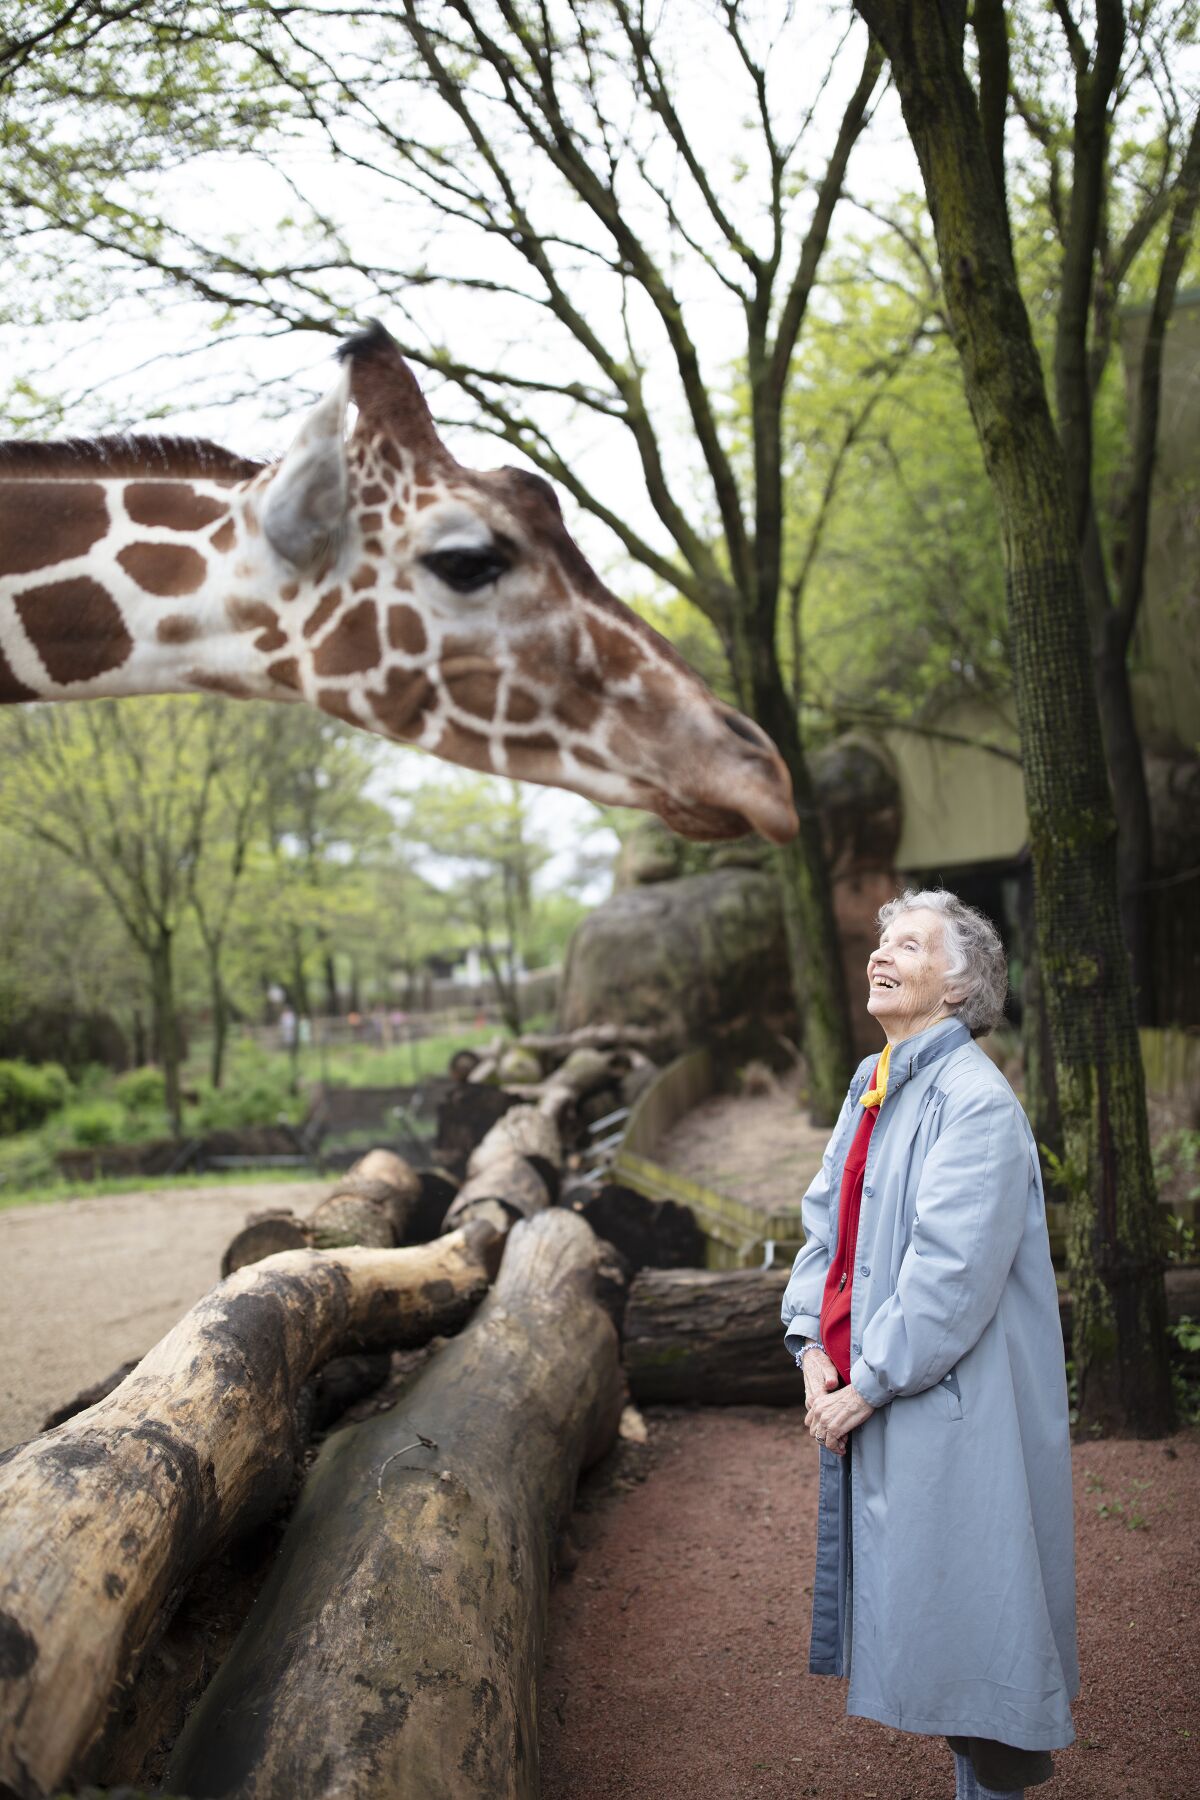 Anne Innis Dagg admires one of the long-necked animals in the documentary “The Woman Who Loves Giraffes.”